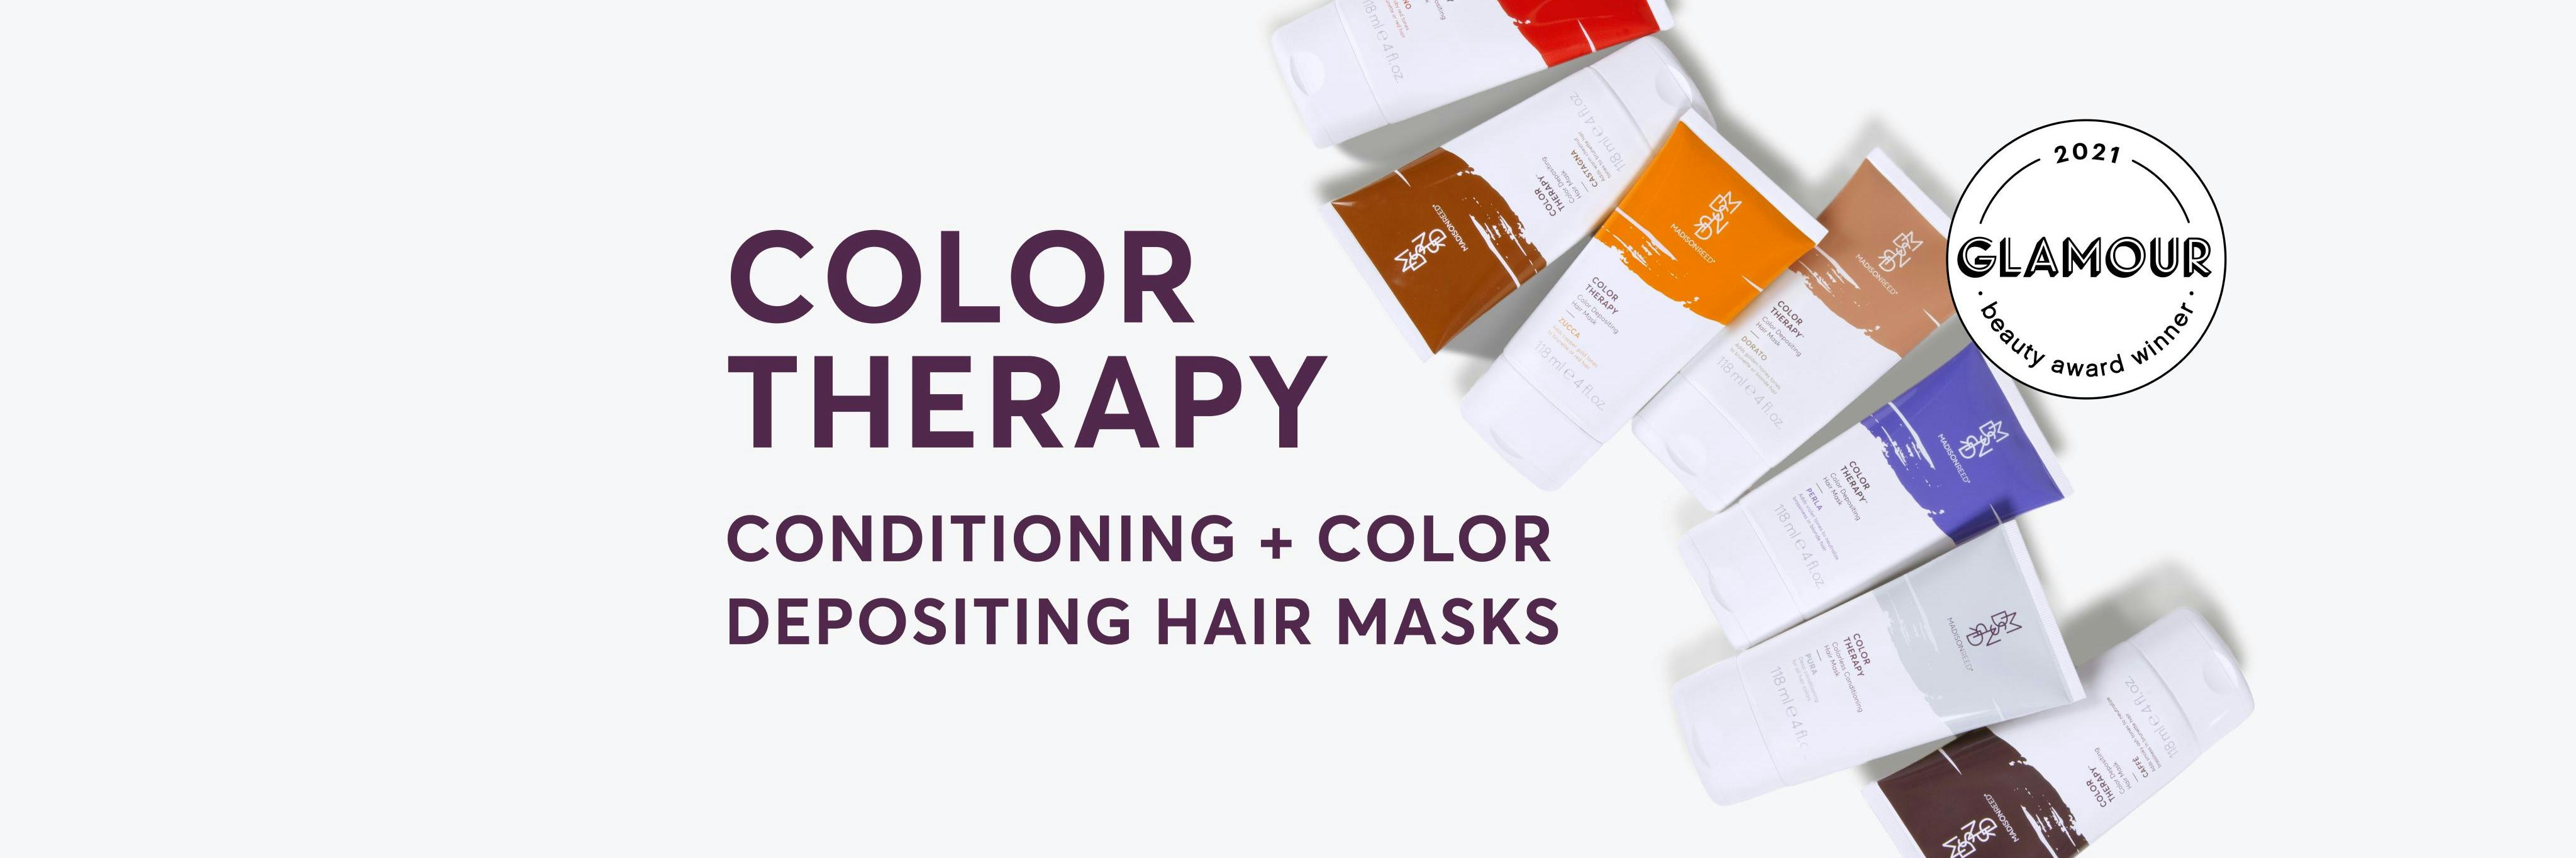 DP22.004 Updated Color Therapy banner